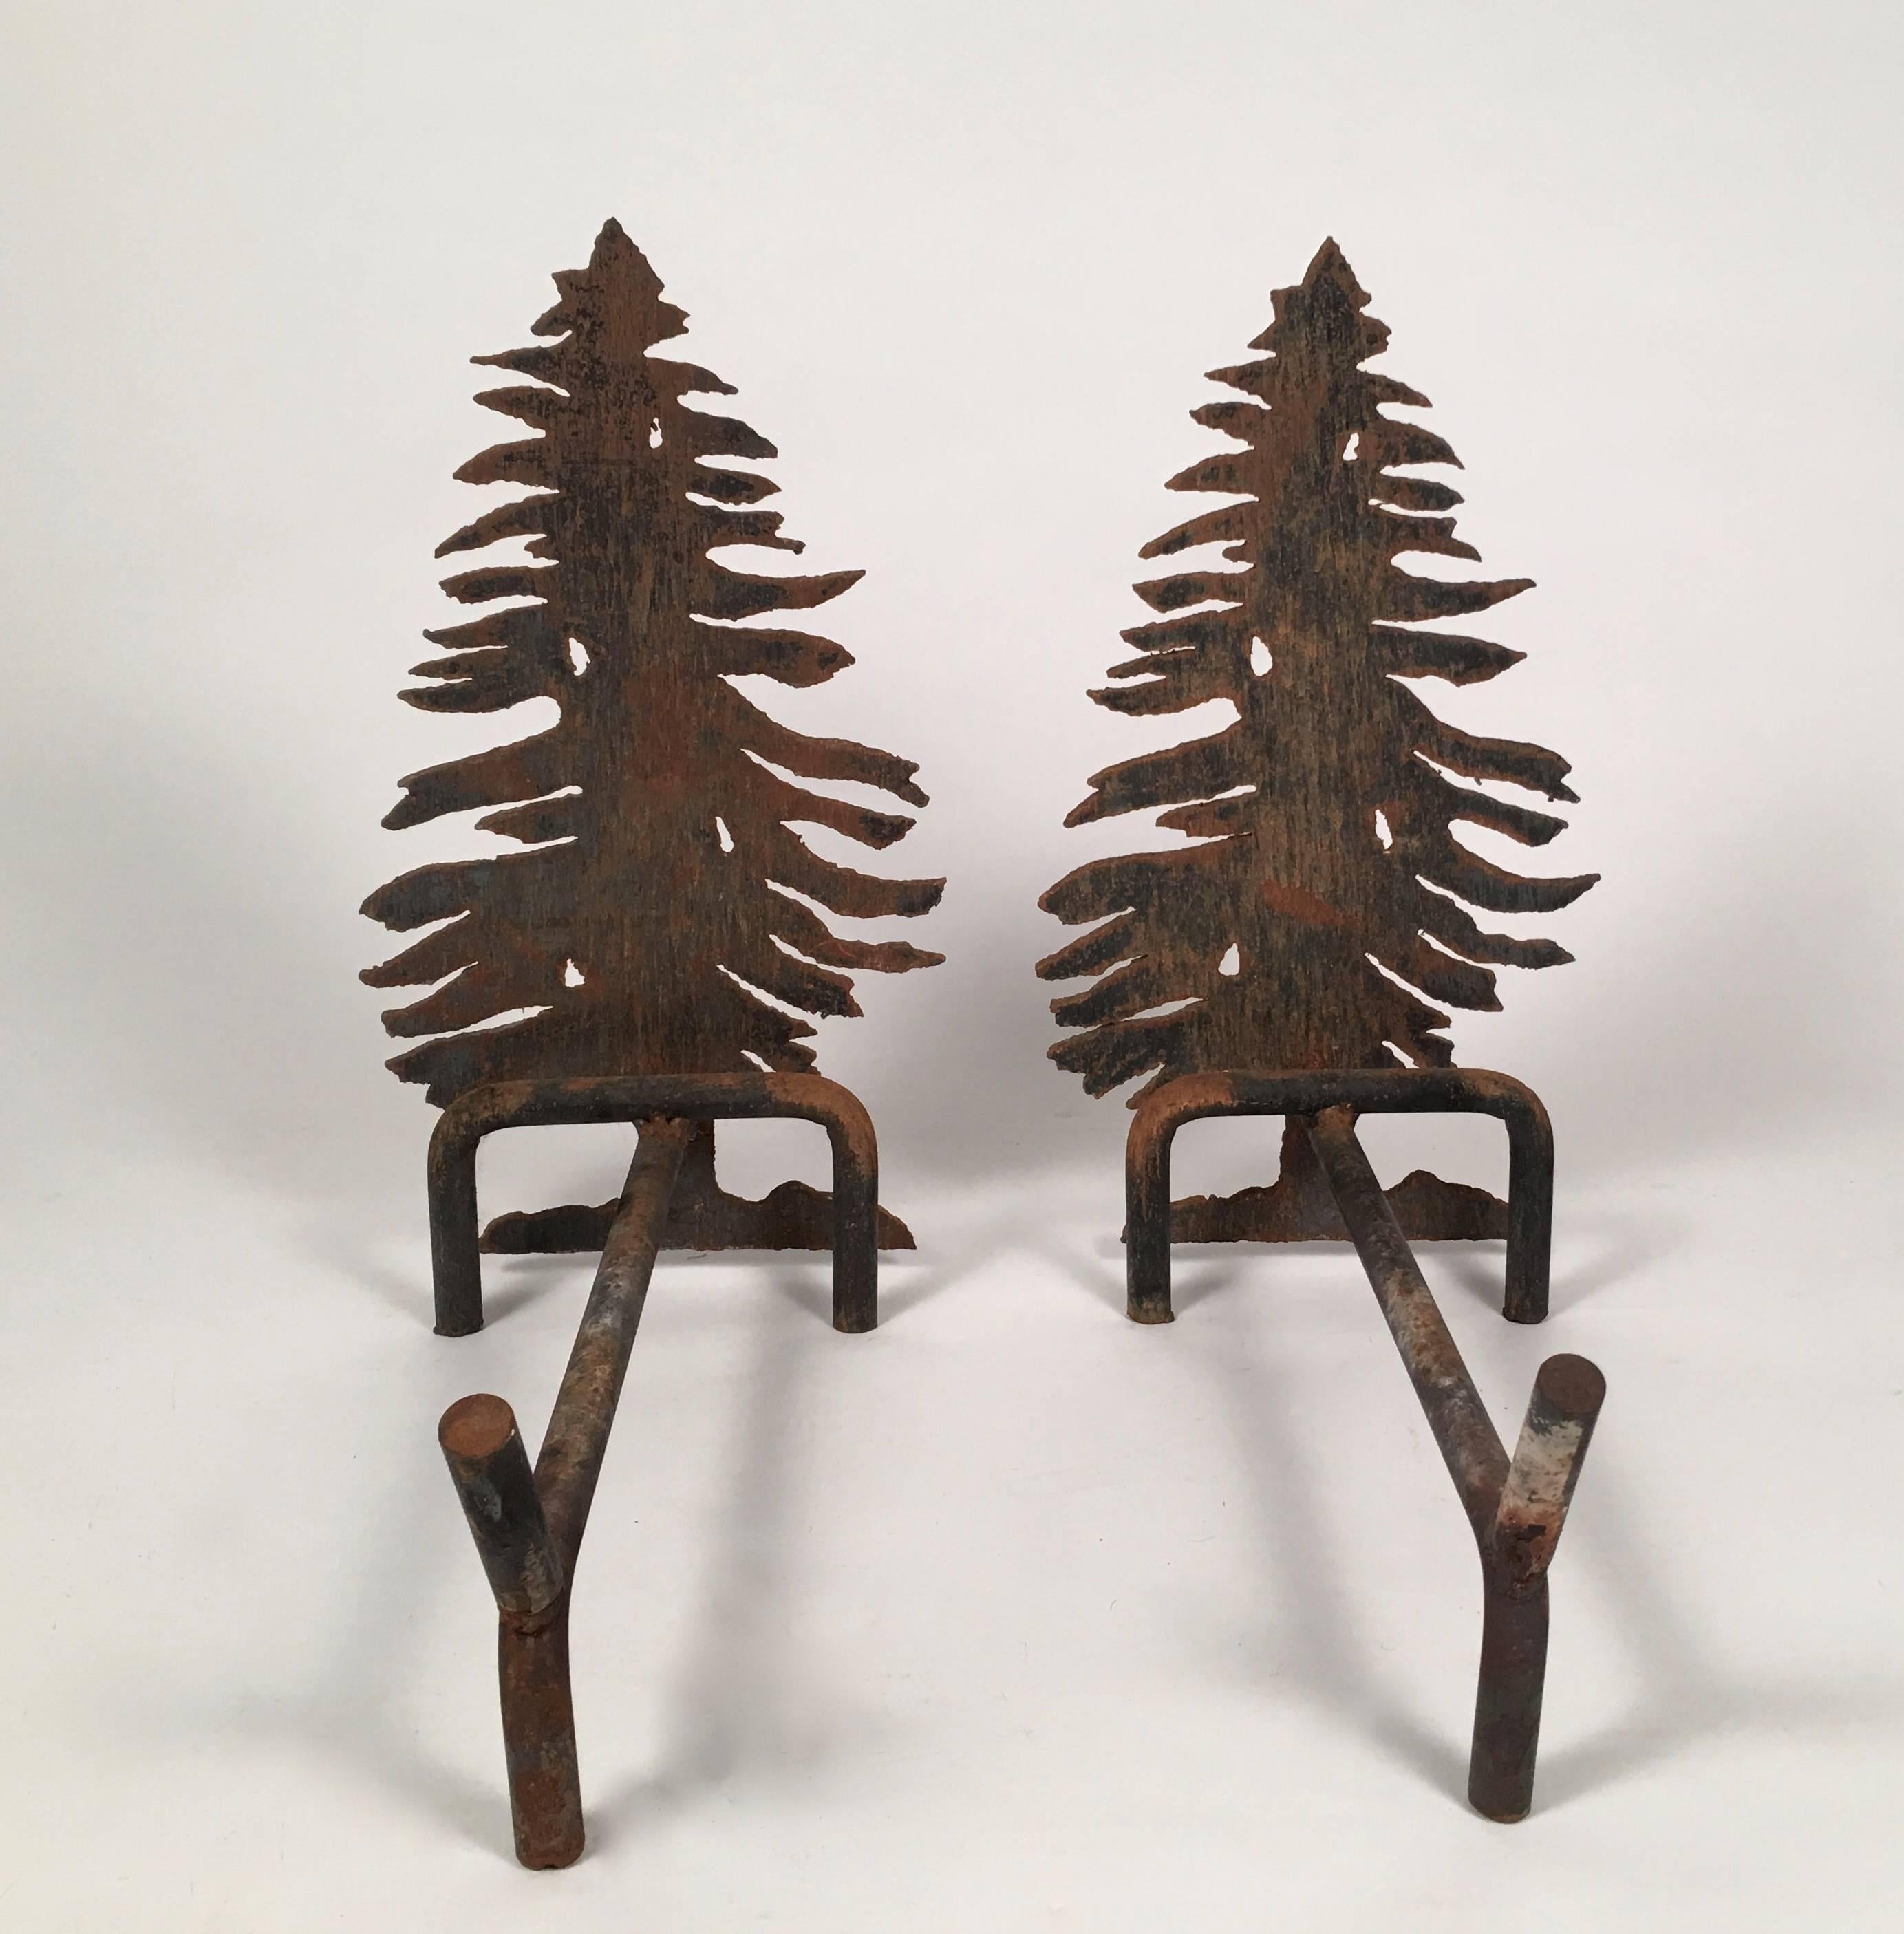 Pair of unusual tree-form andirons in cut iron, with welded iron rod fire dogs.